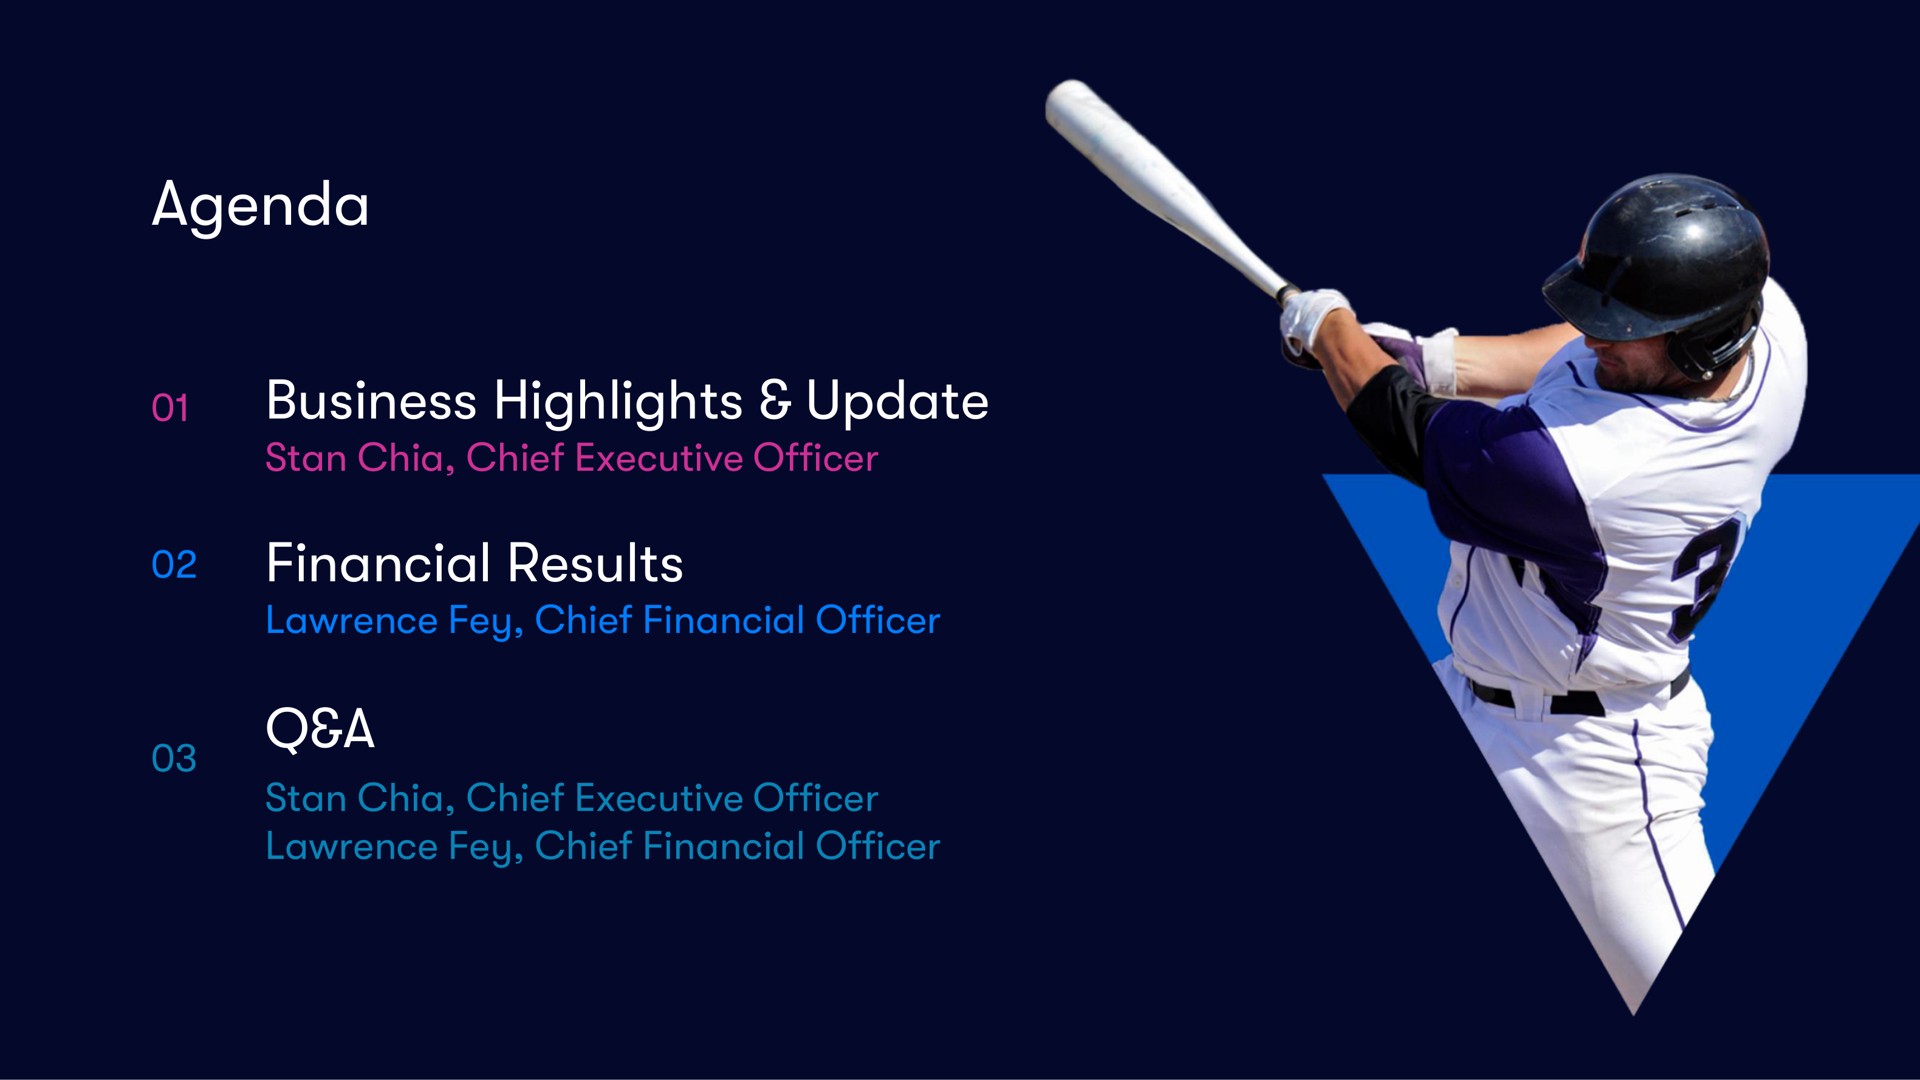 agenda business highlights update chia chief executive officer financial results fey chief financial officer a chia chief executive officer fey chief financial officer | Vivid Seats